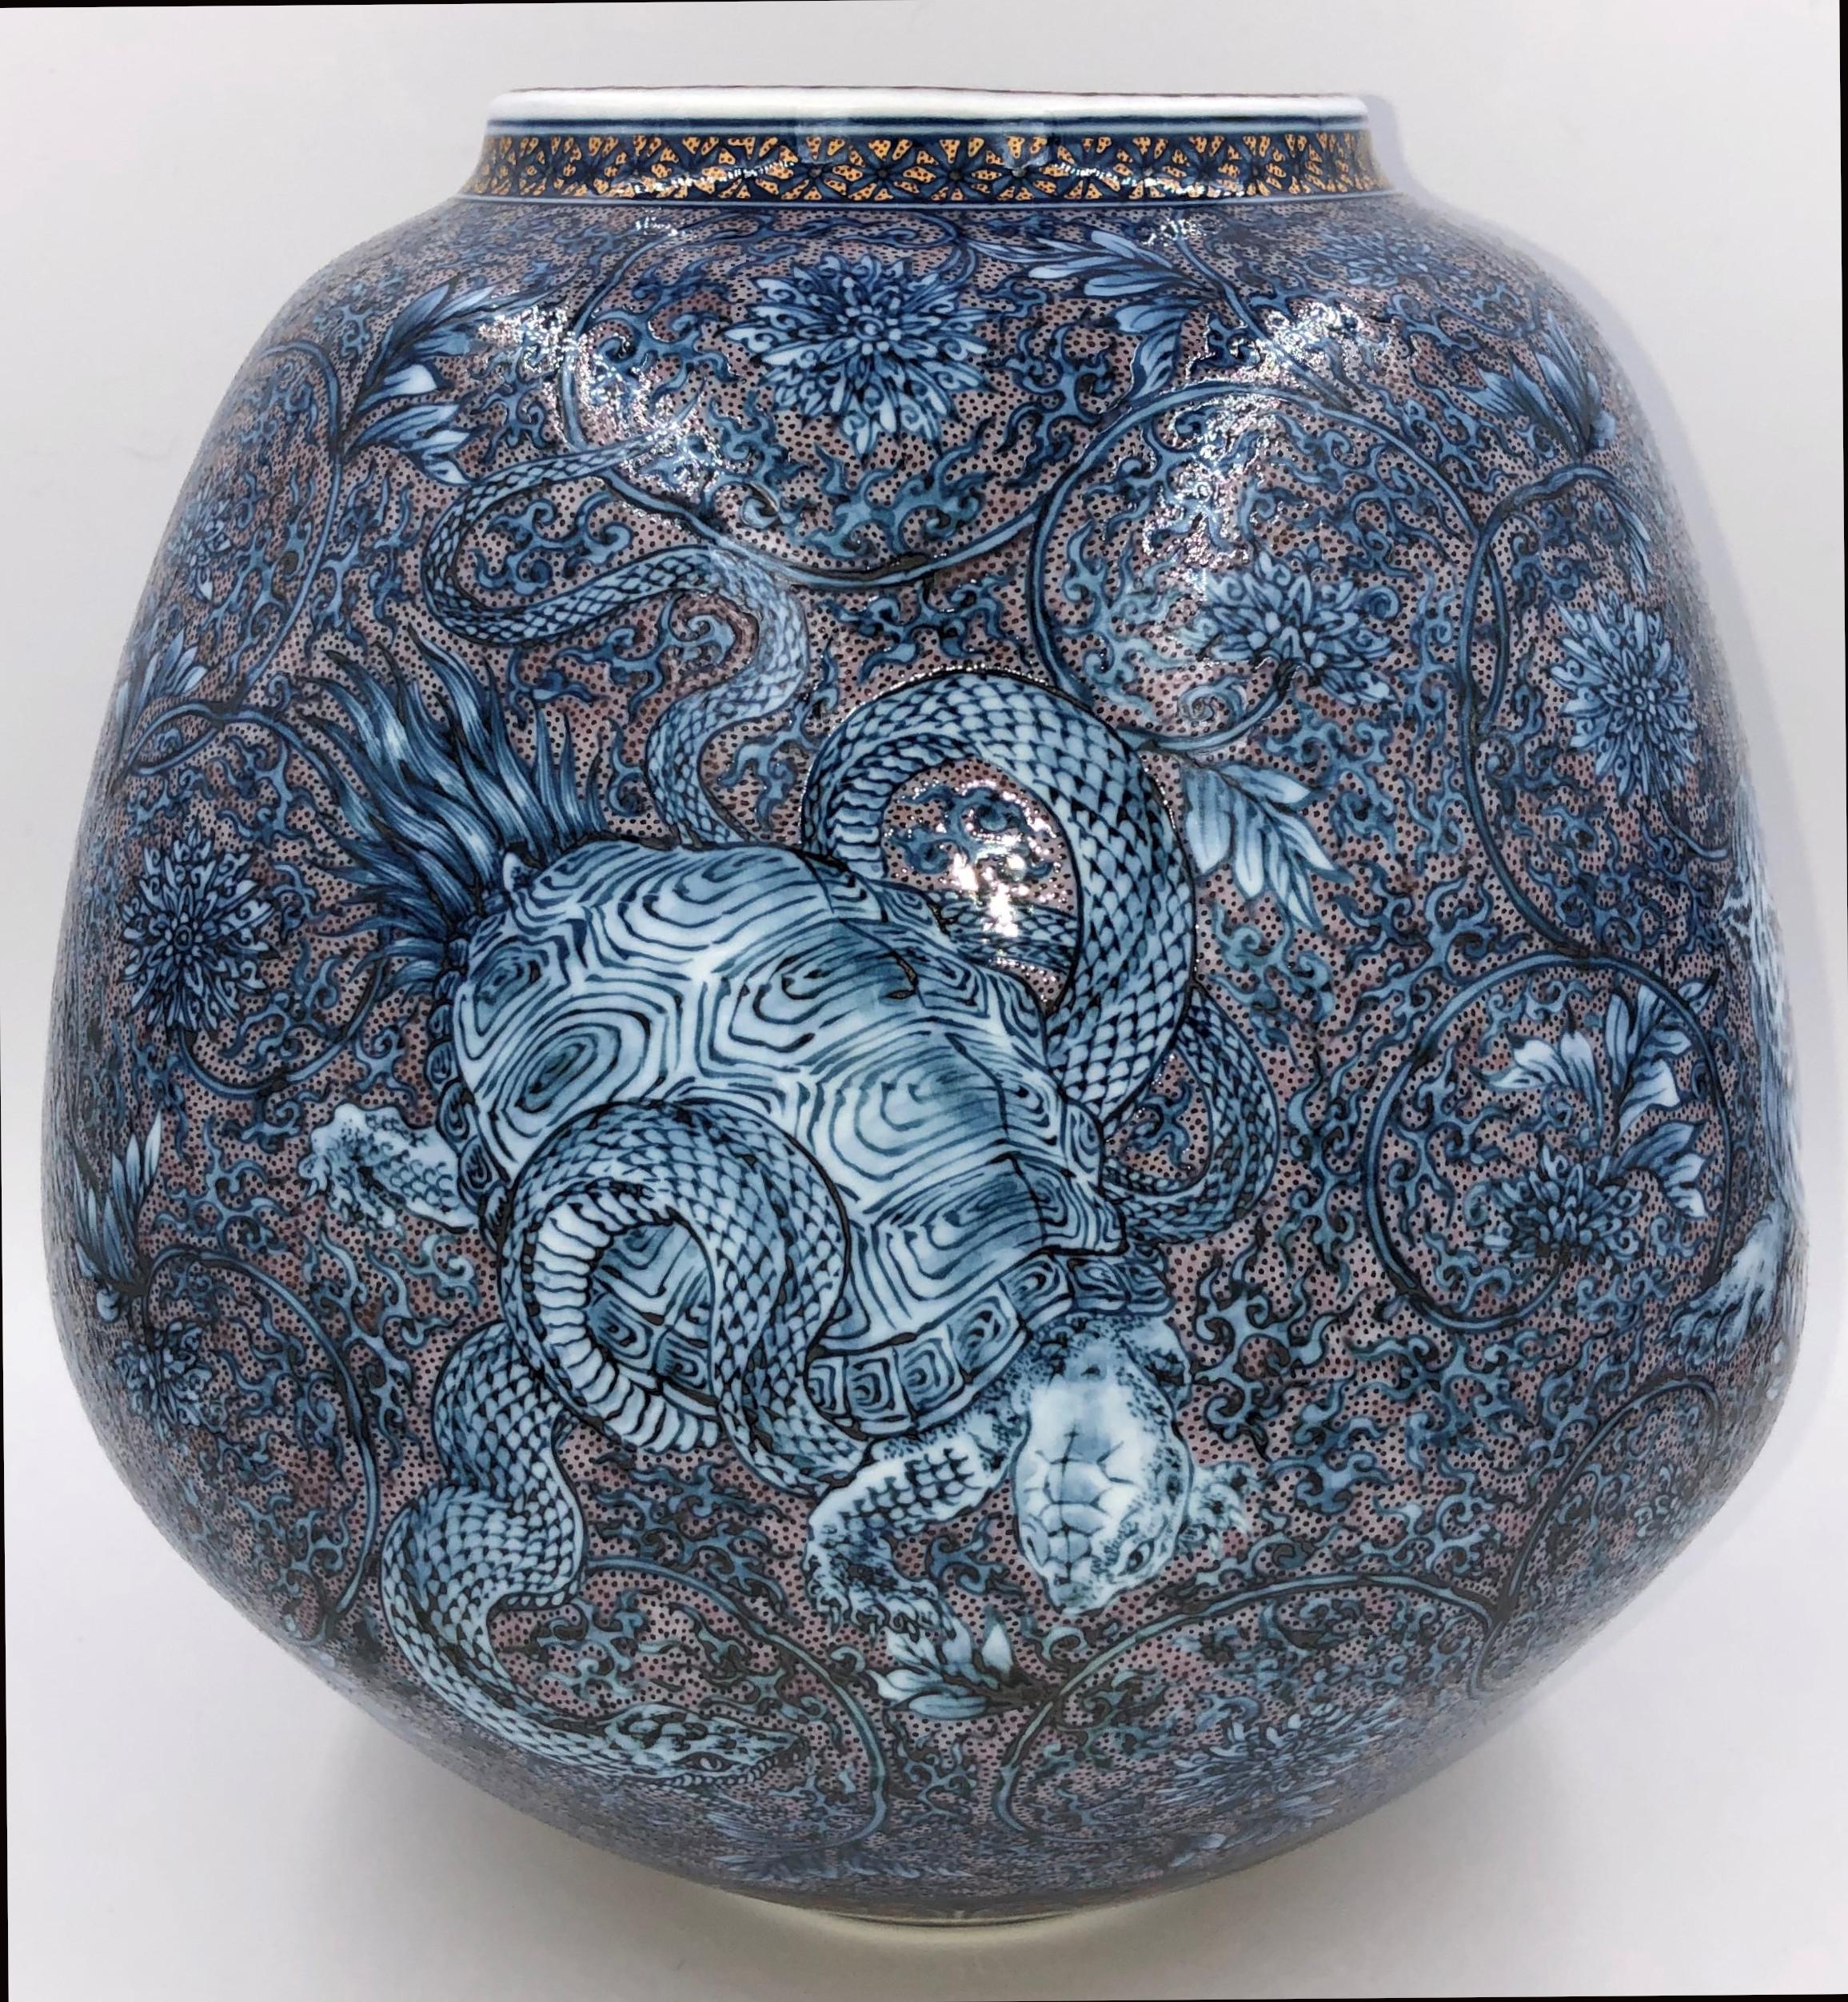 Outstanding Japanese contemporary museum quality highly detailed, extremely intricately hand painted porcelain vase, showcasing the four auspicious creatures of Chinese mythology said to be the guardians of the four points of the compass. The vase